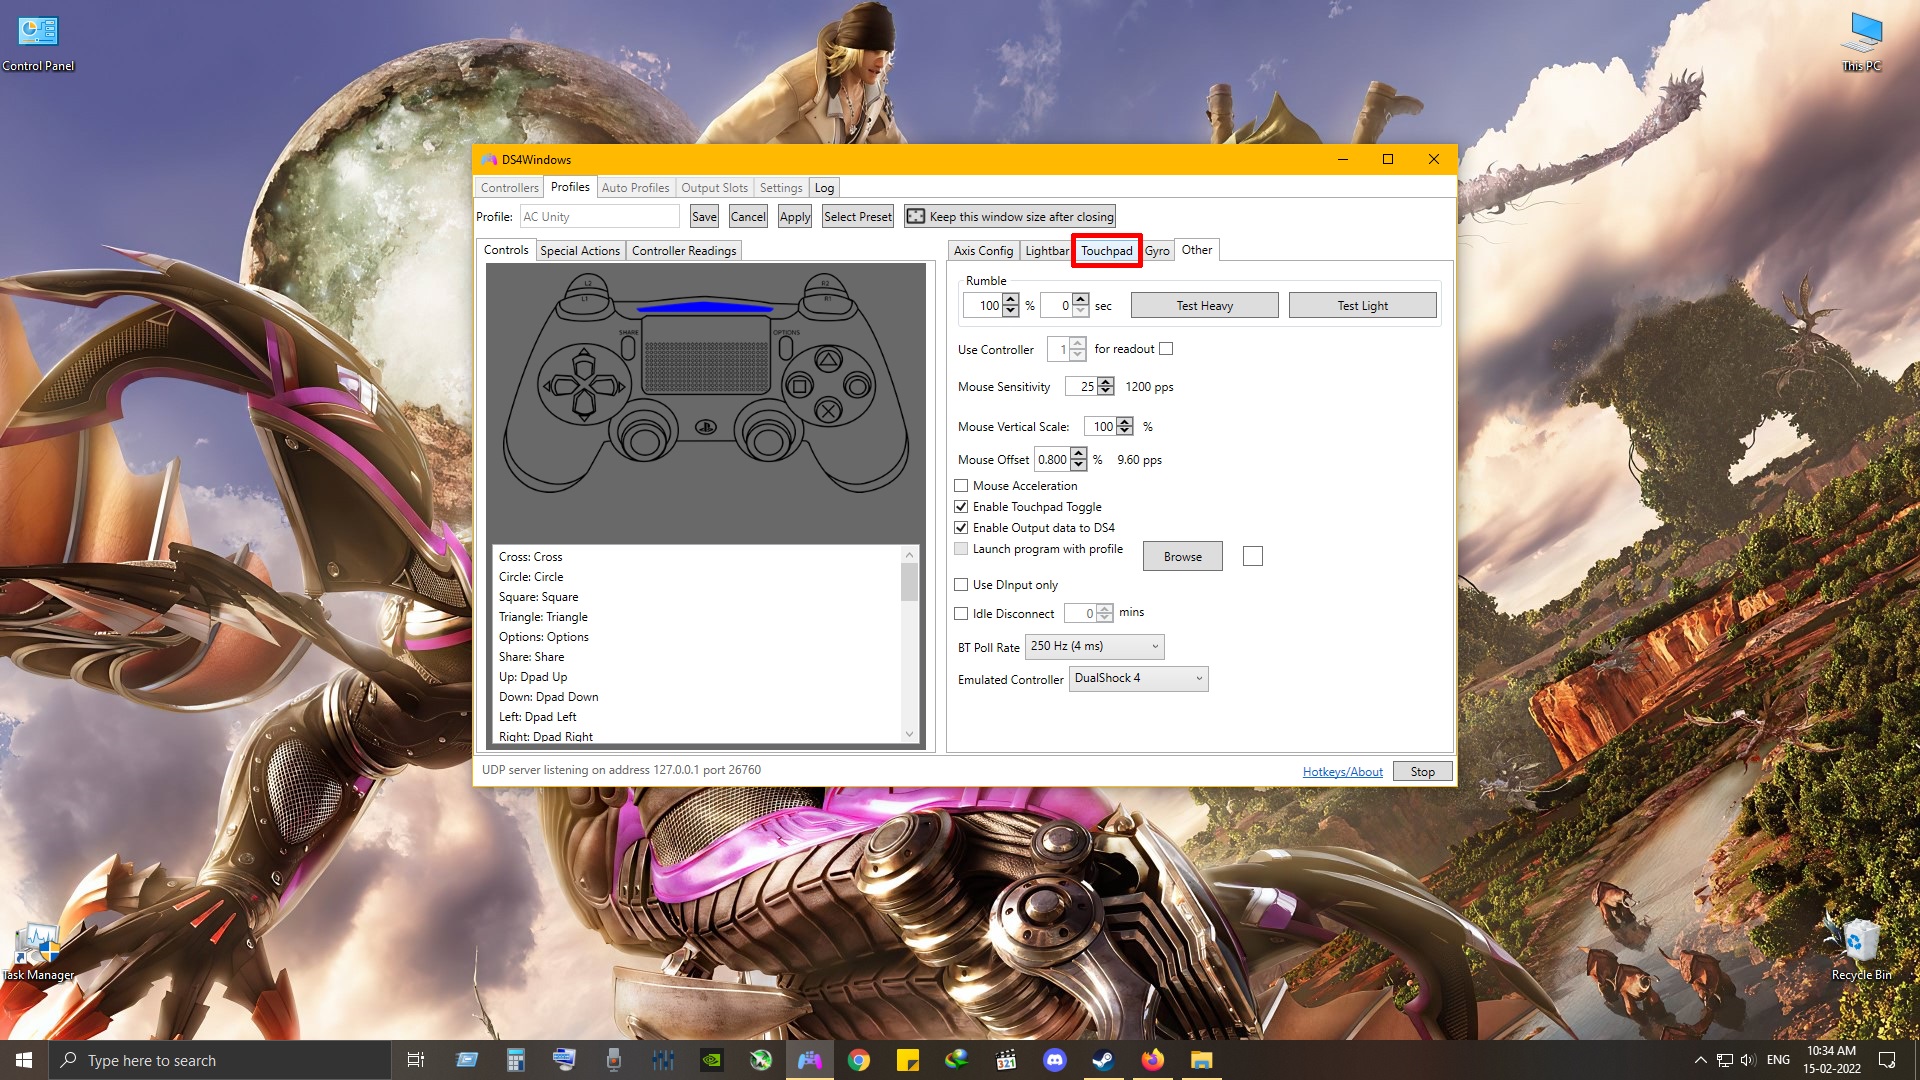 Assassin's Creed Unity Playstation Button Prompts with DS4 v2 Controller - Step 2: Using DS4Windows - 4BA3FAC